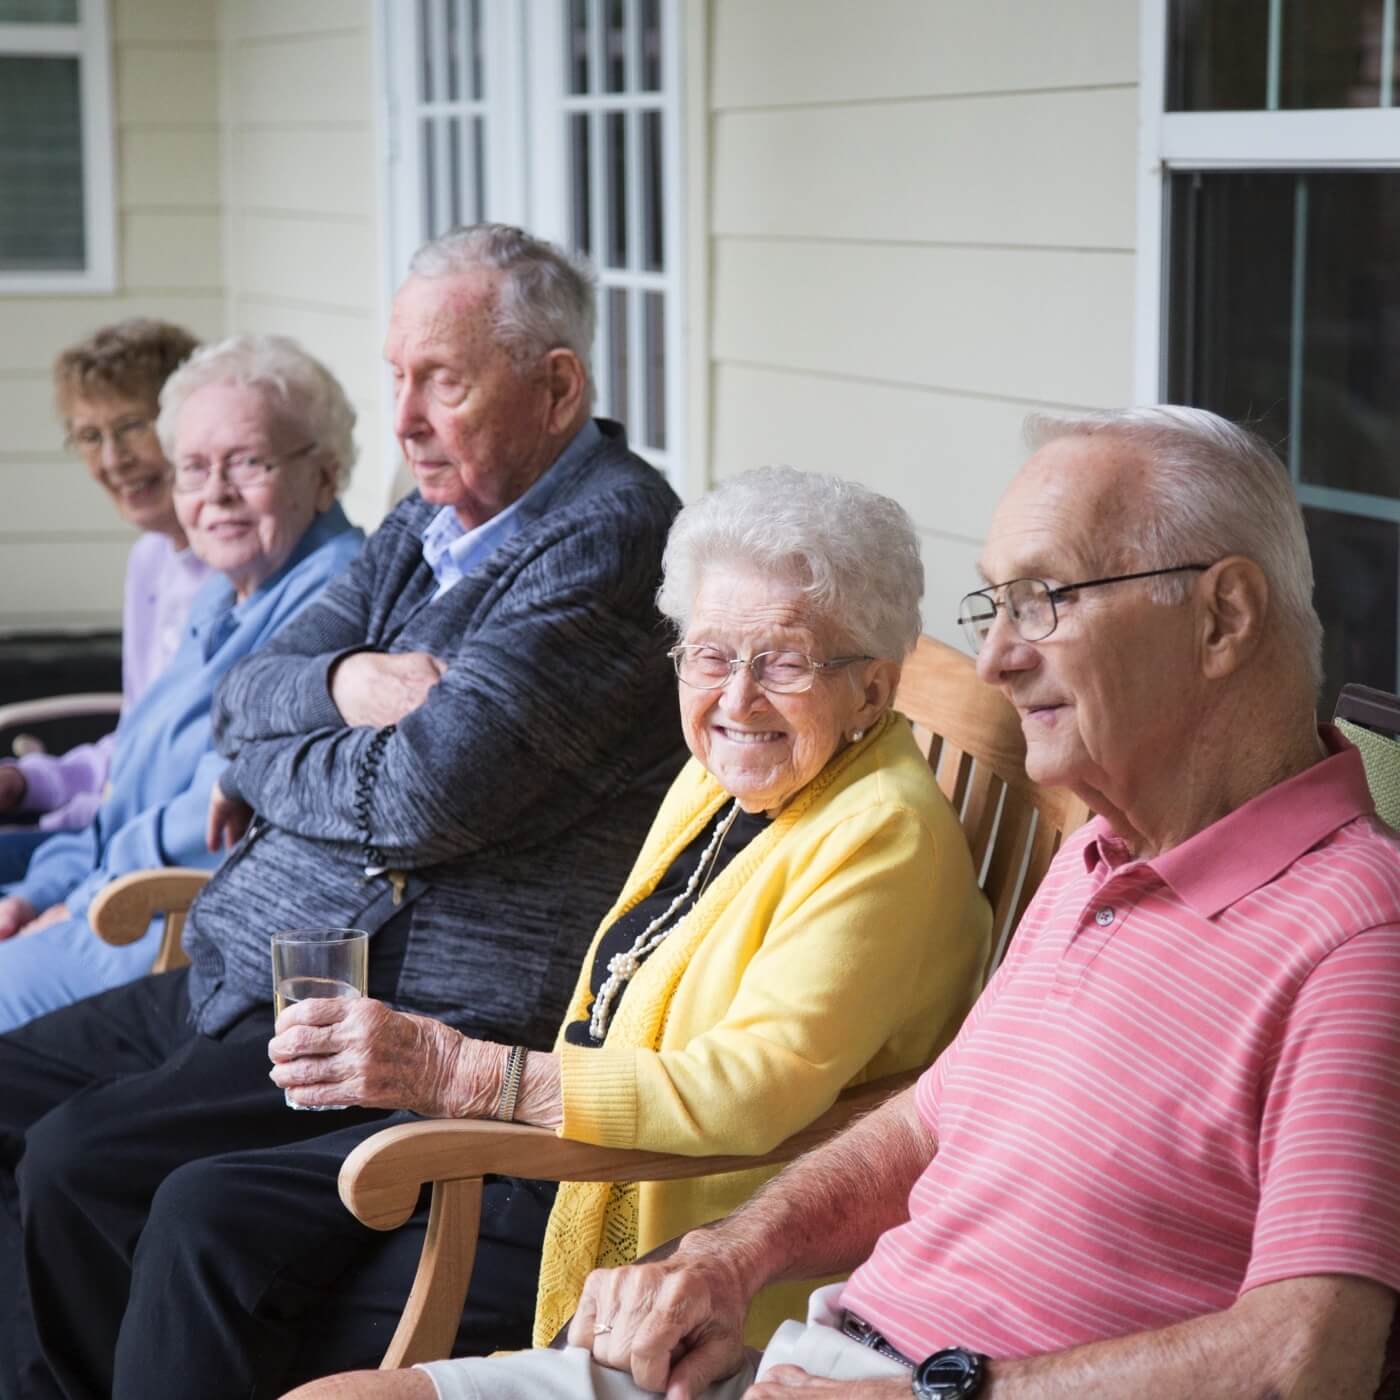 Group of residents sitting together on front porch